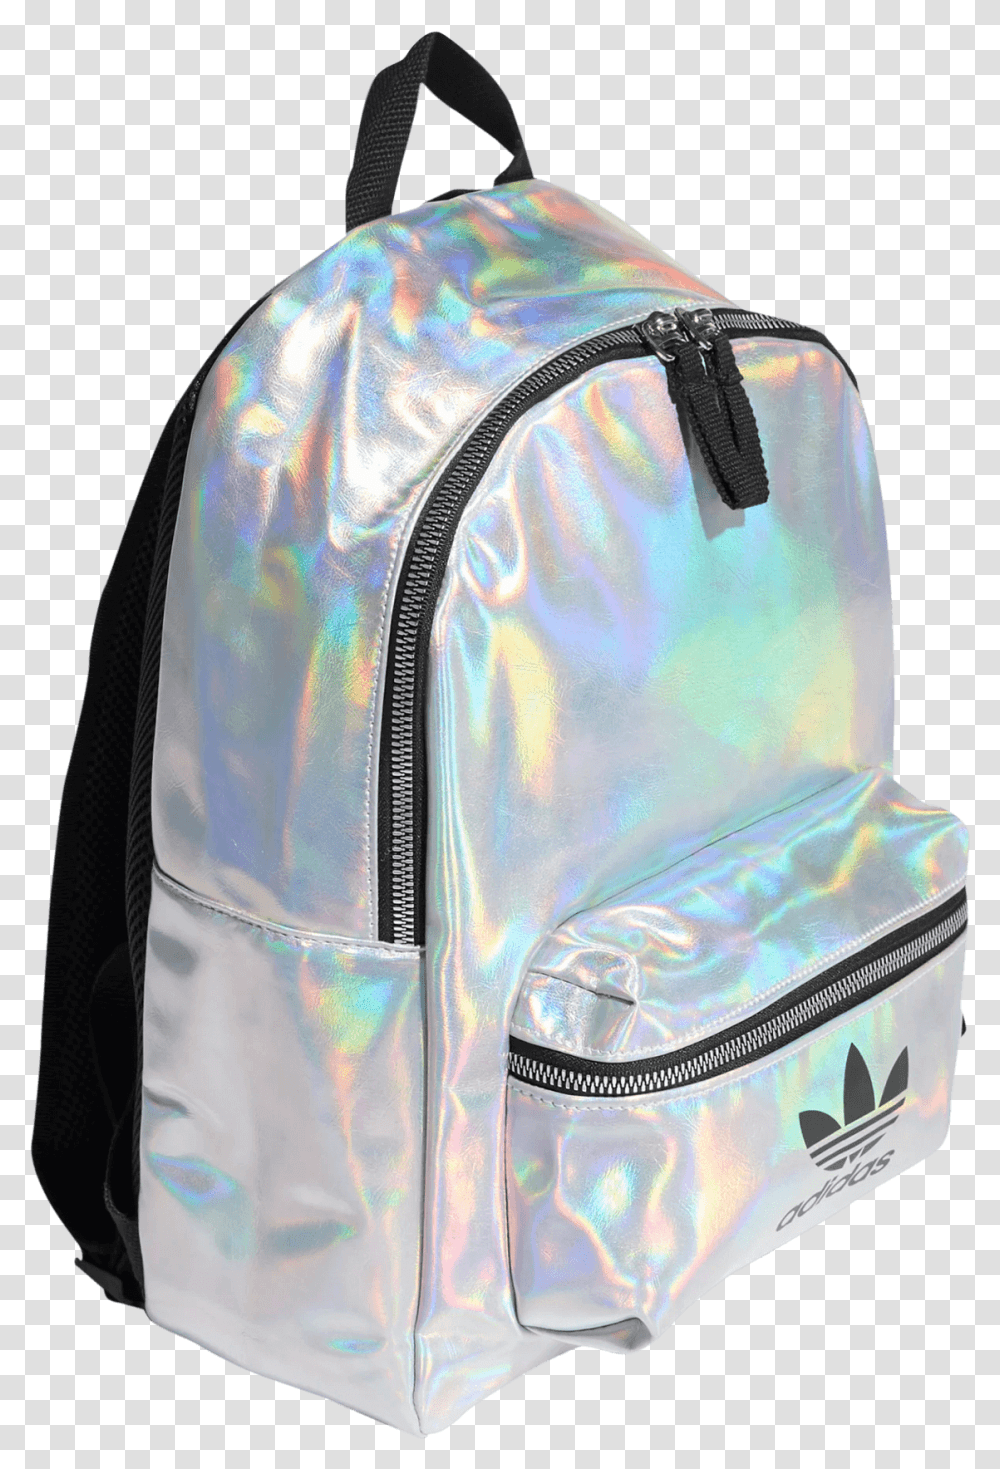 Backpacks For Women Adidas Cheap Online Adidas, Bag Transparent Png